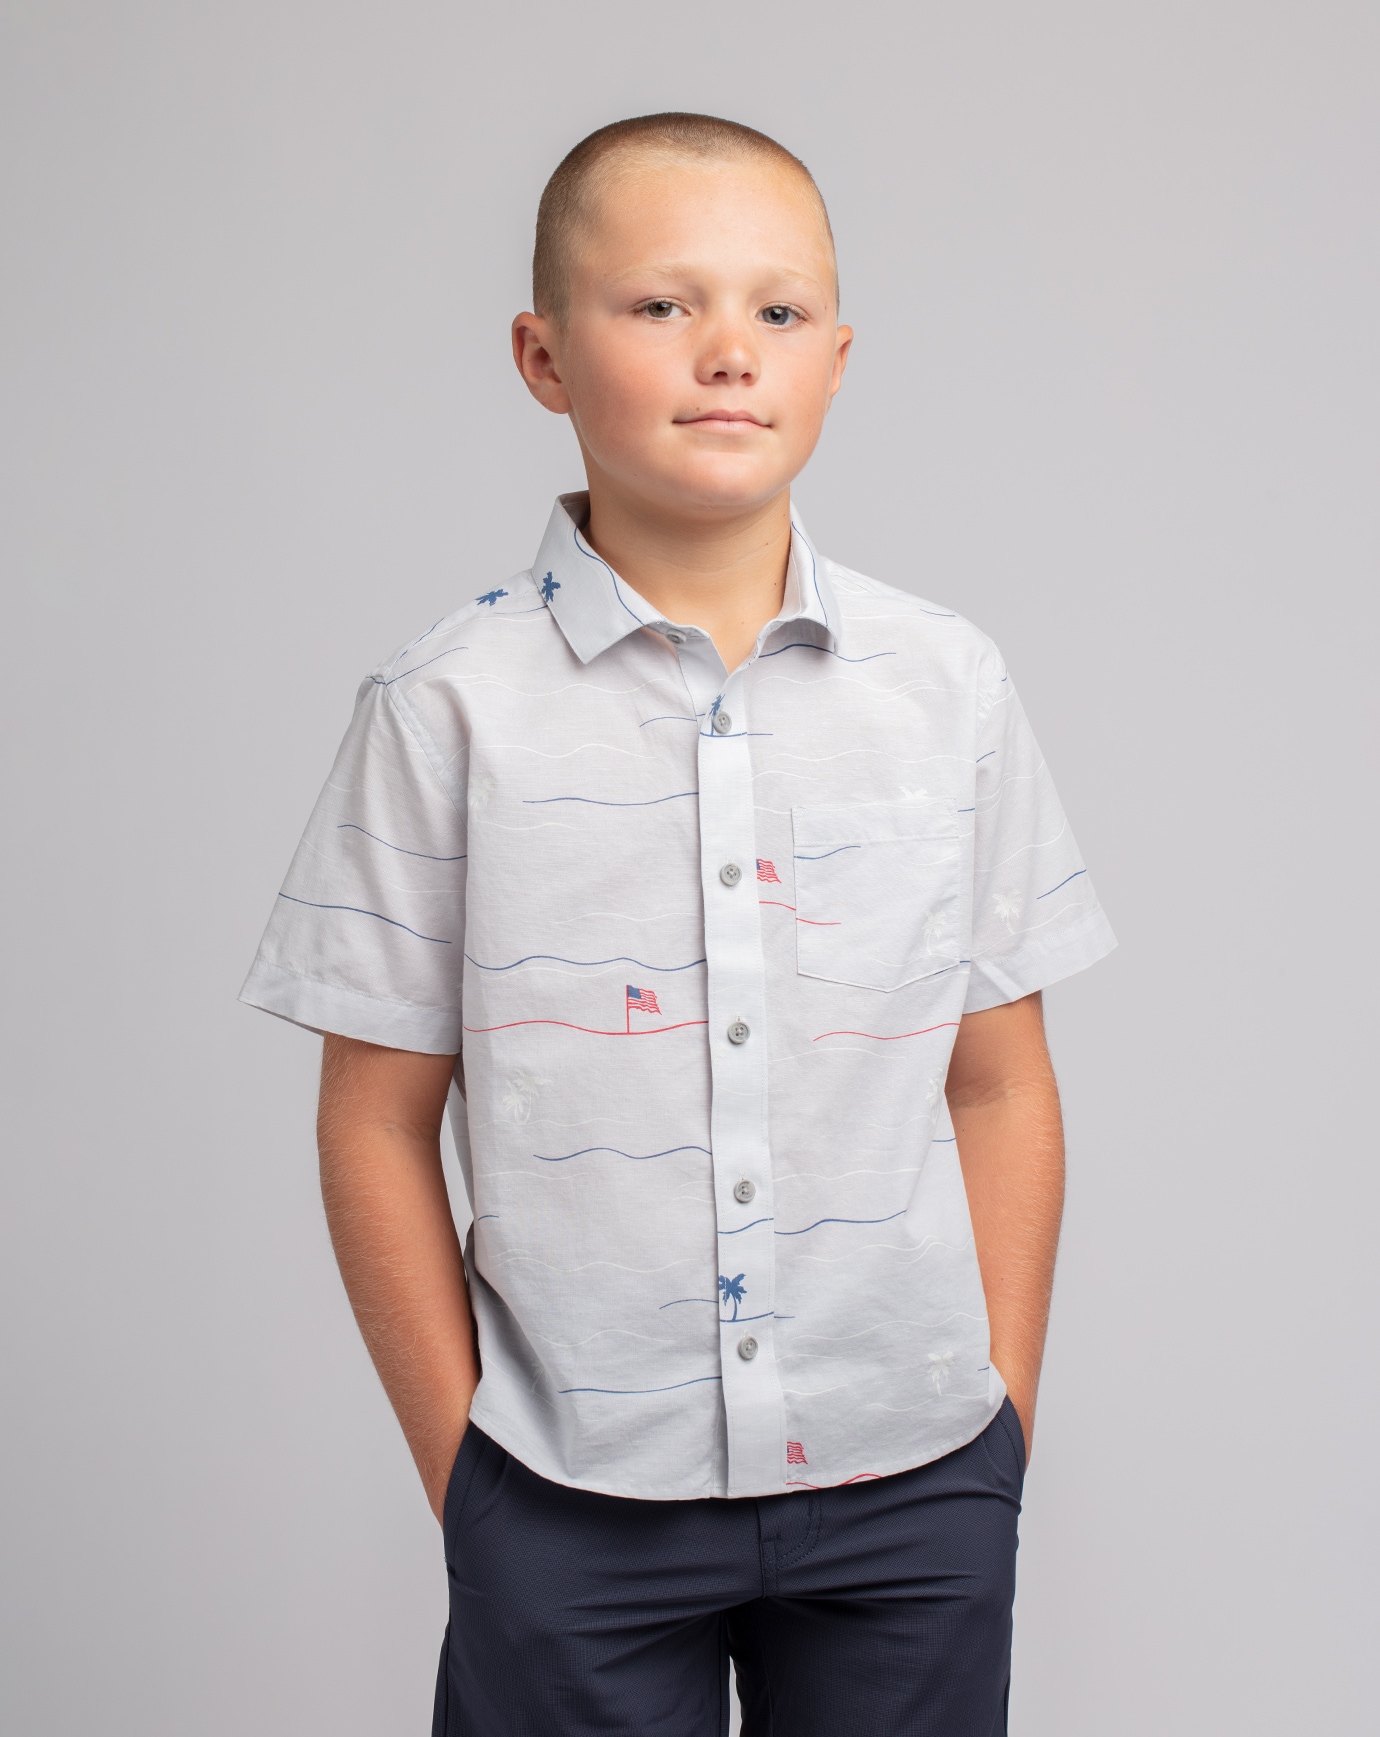 STAR SPANGLED BANNER YOUTH BUTTON-UP Image Thumbnail 1